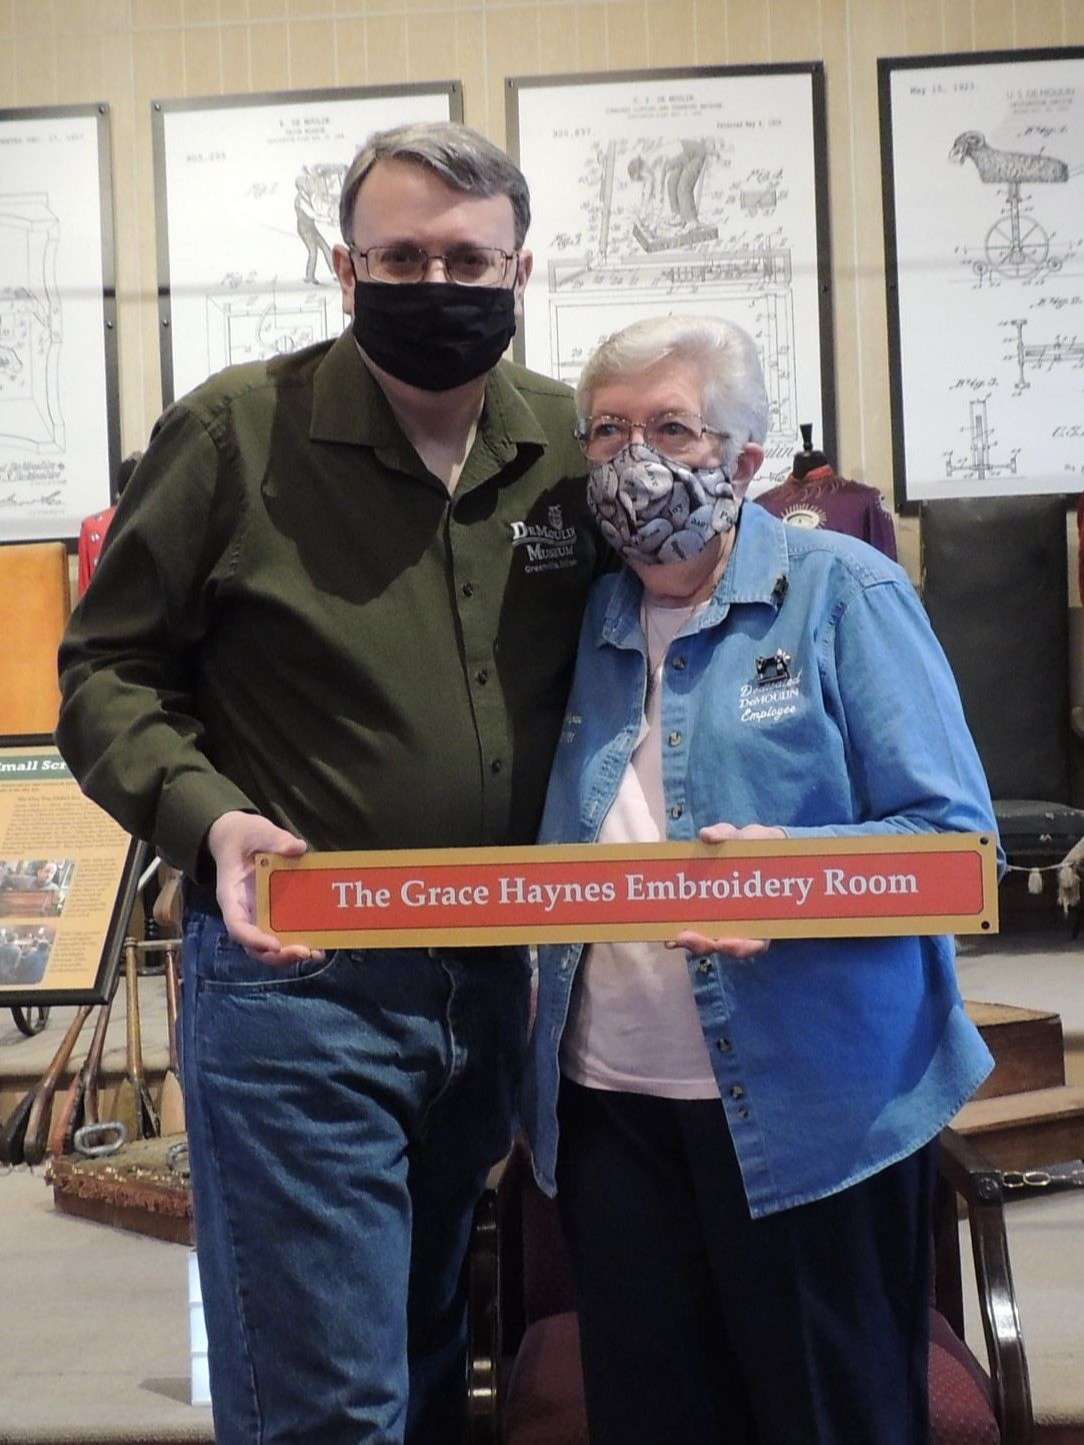 Man in green shirt and Woman in blue shirt stand together holding red and yellow museum sign.